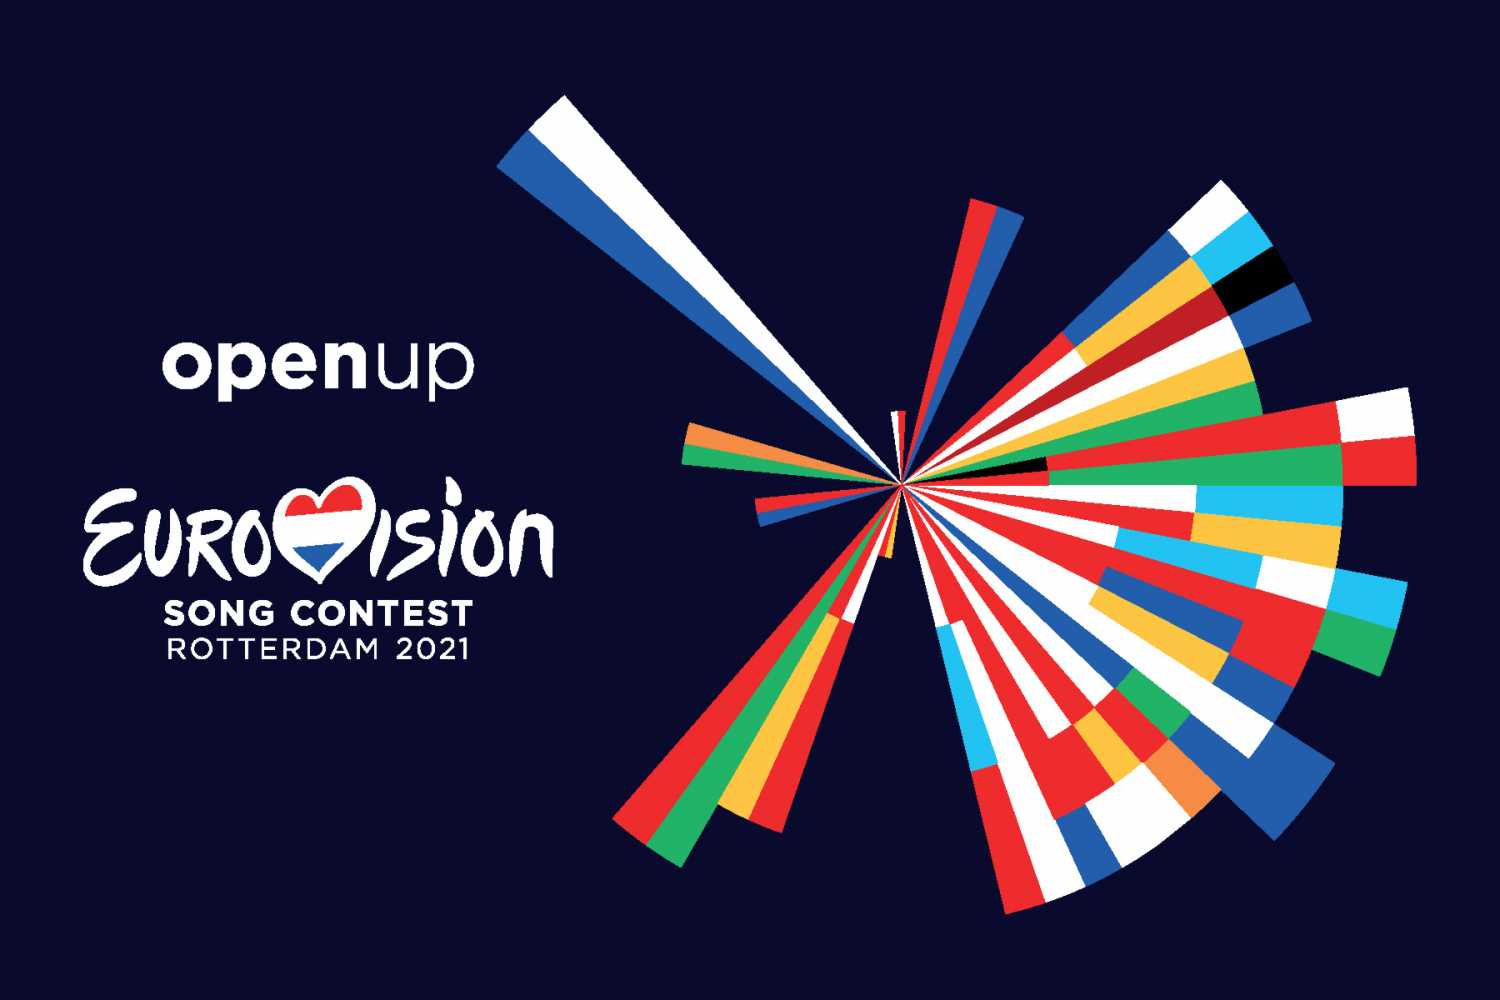 ESC 2021 takes place this May